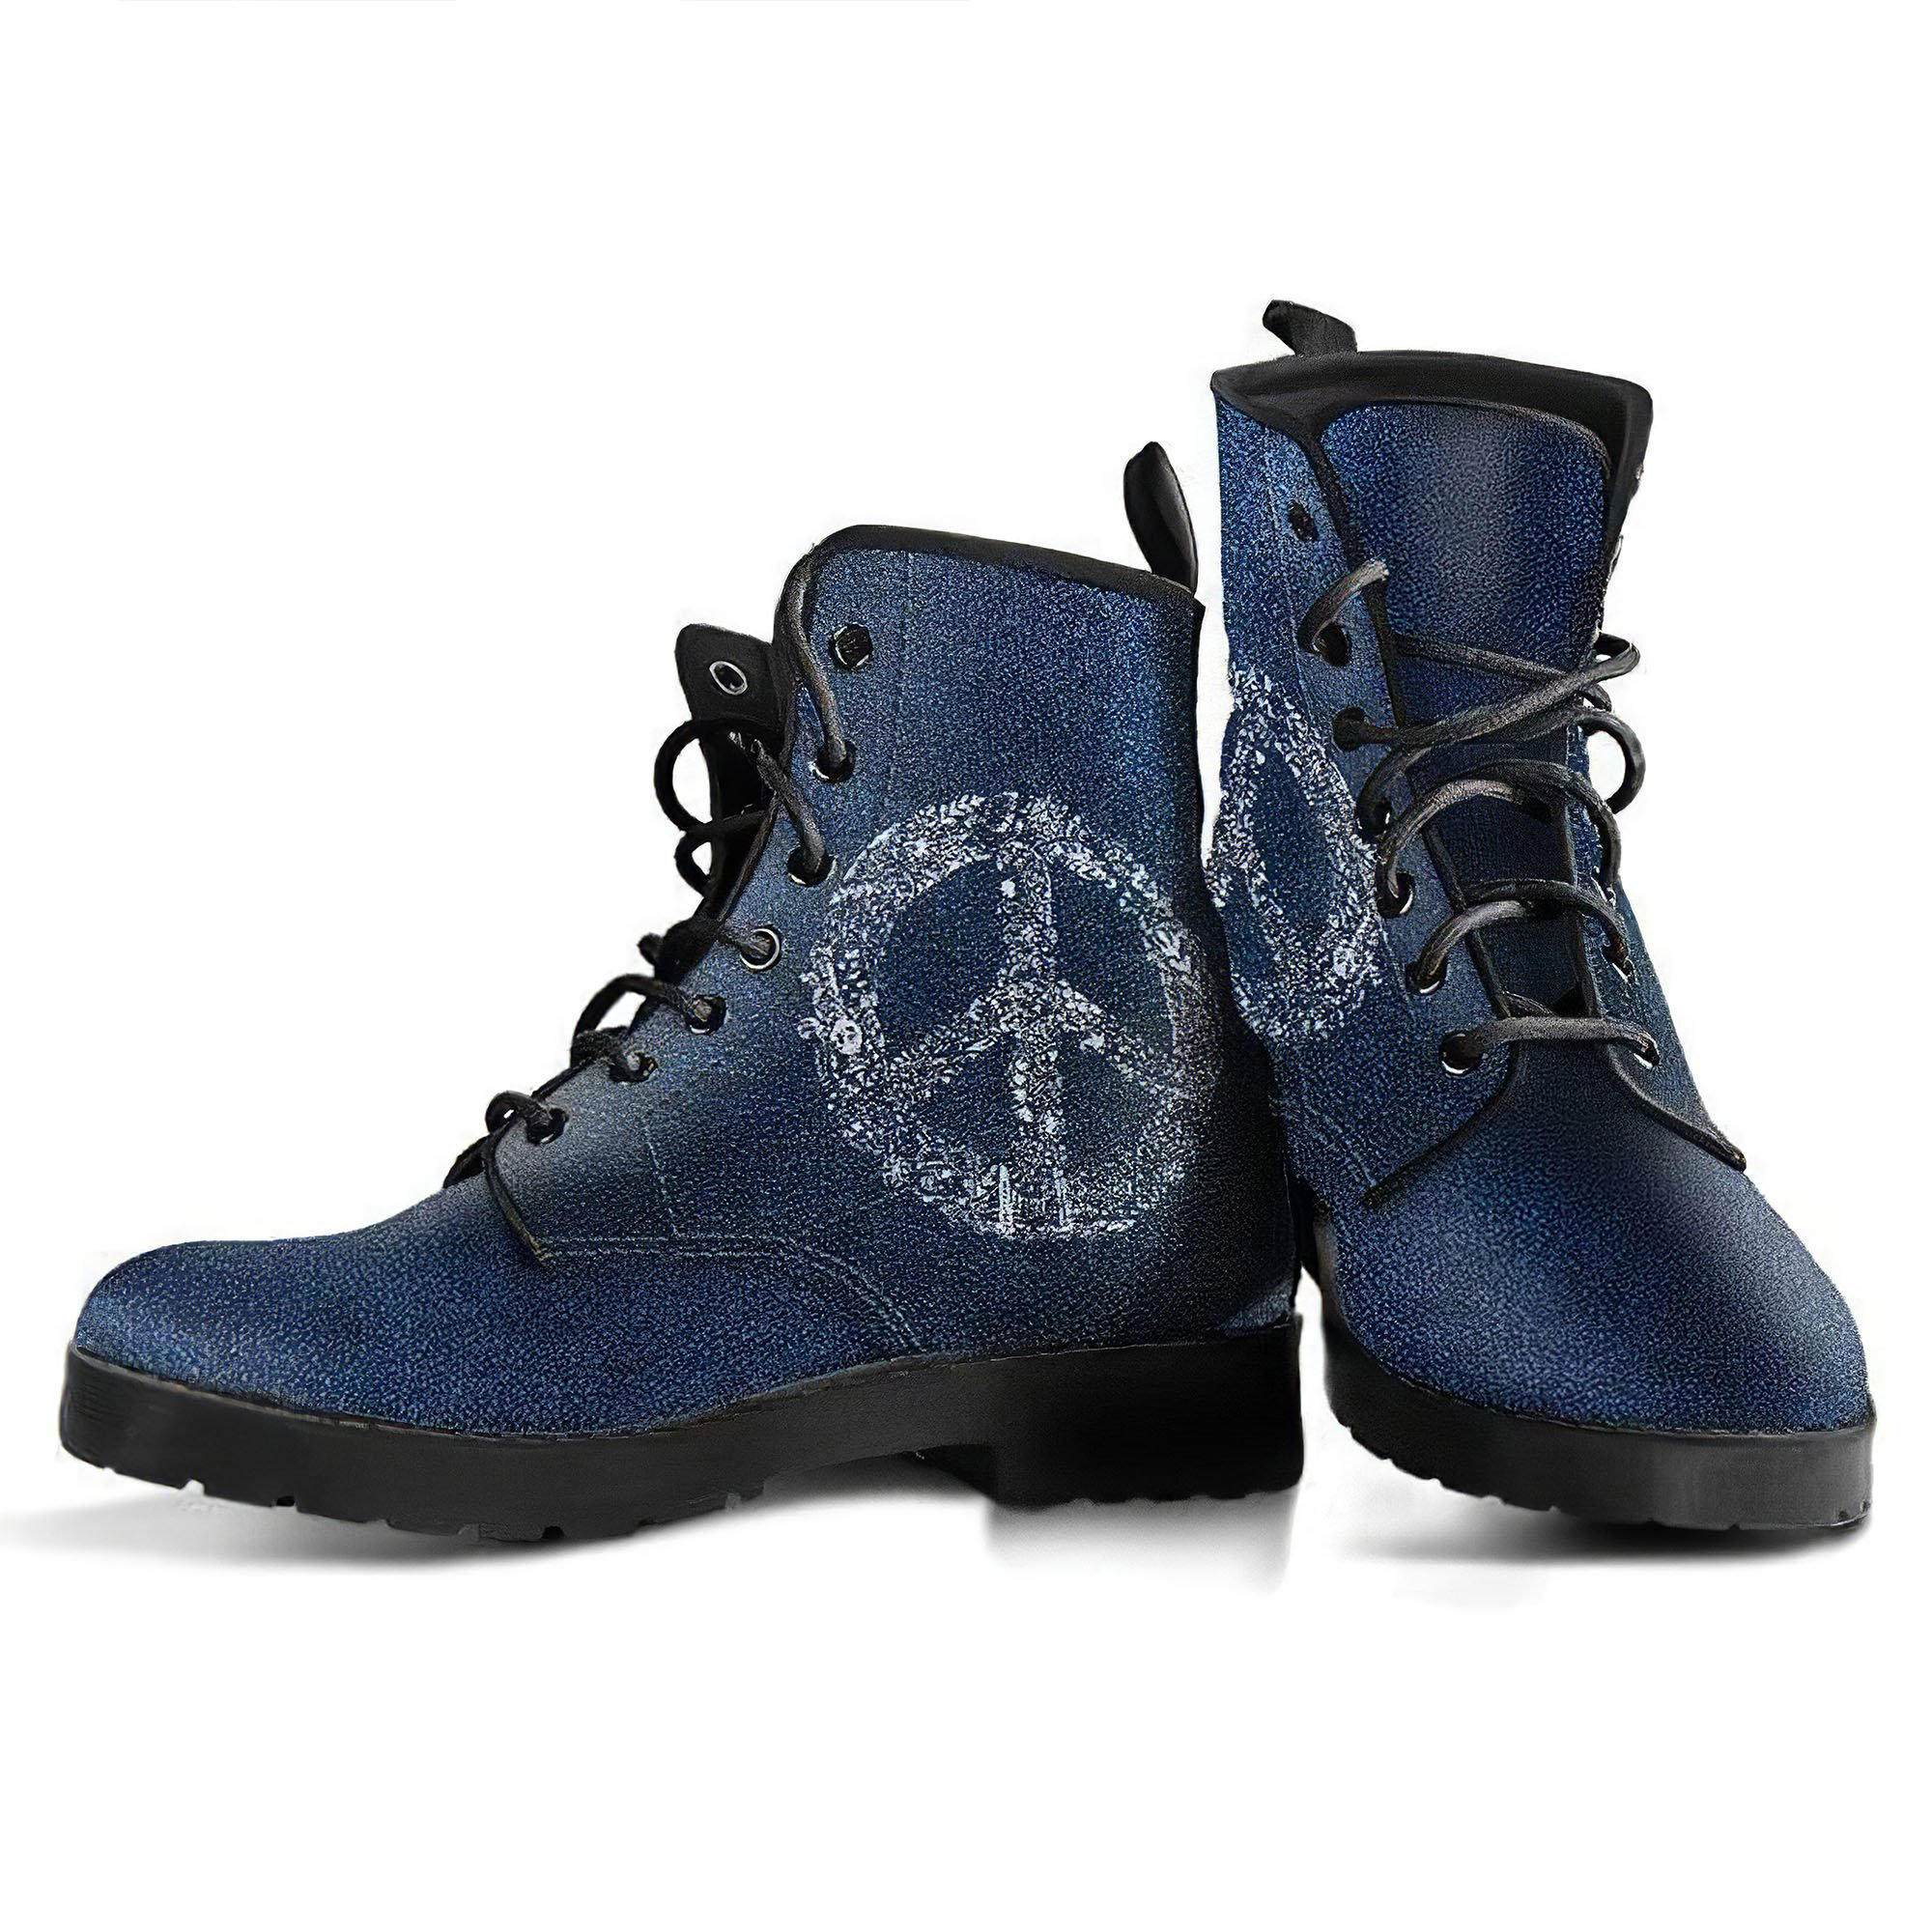 leather-peace-handcrafted-boots-gp-main.jpg